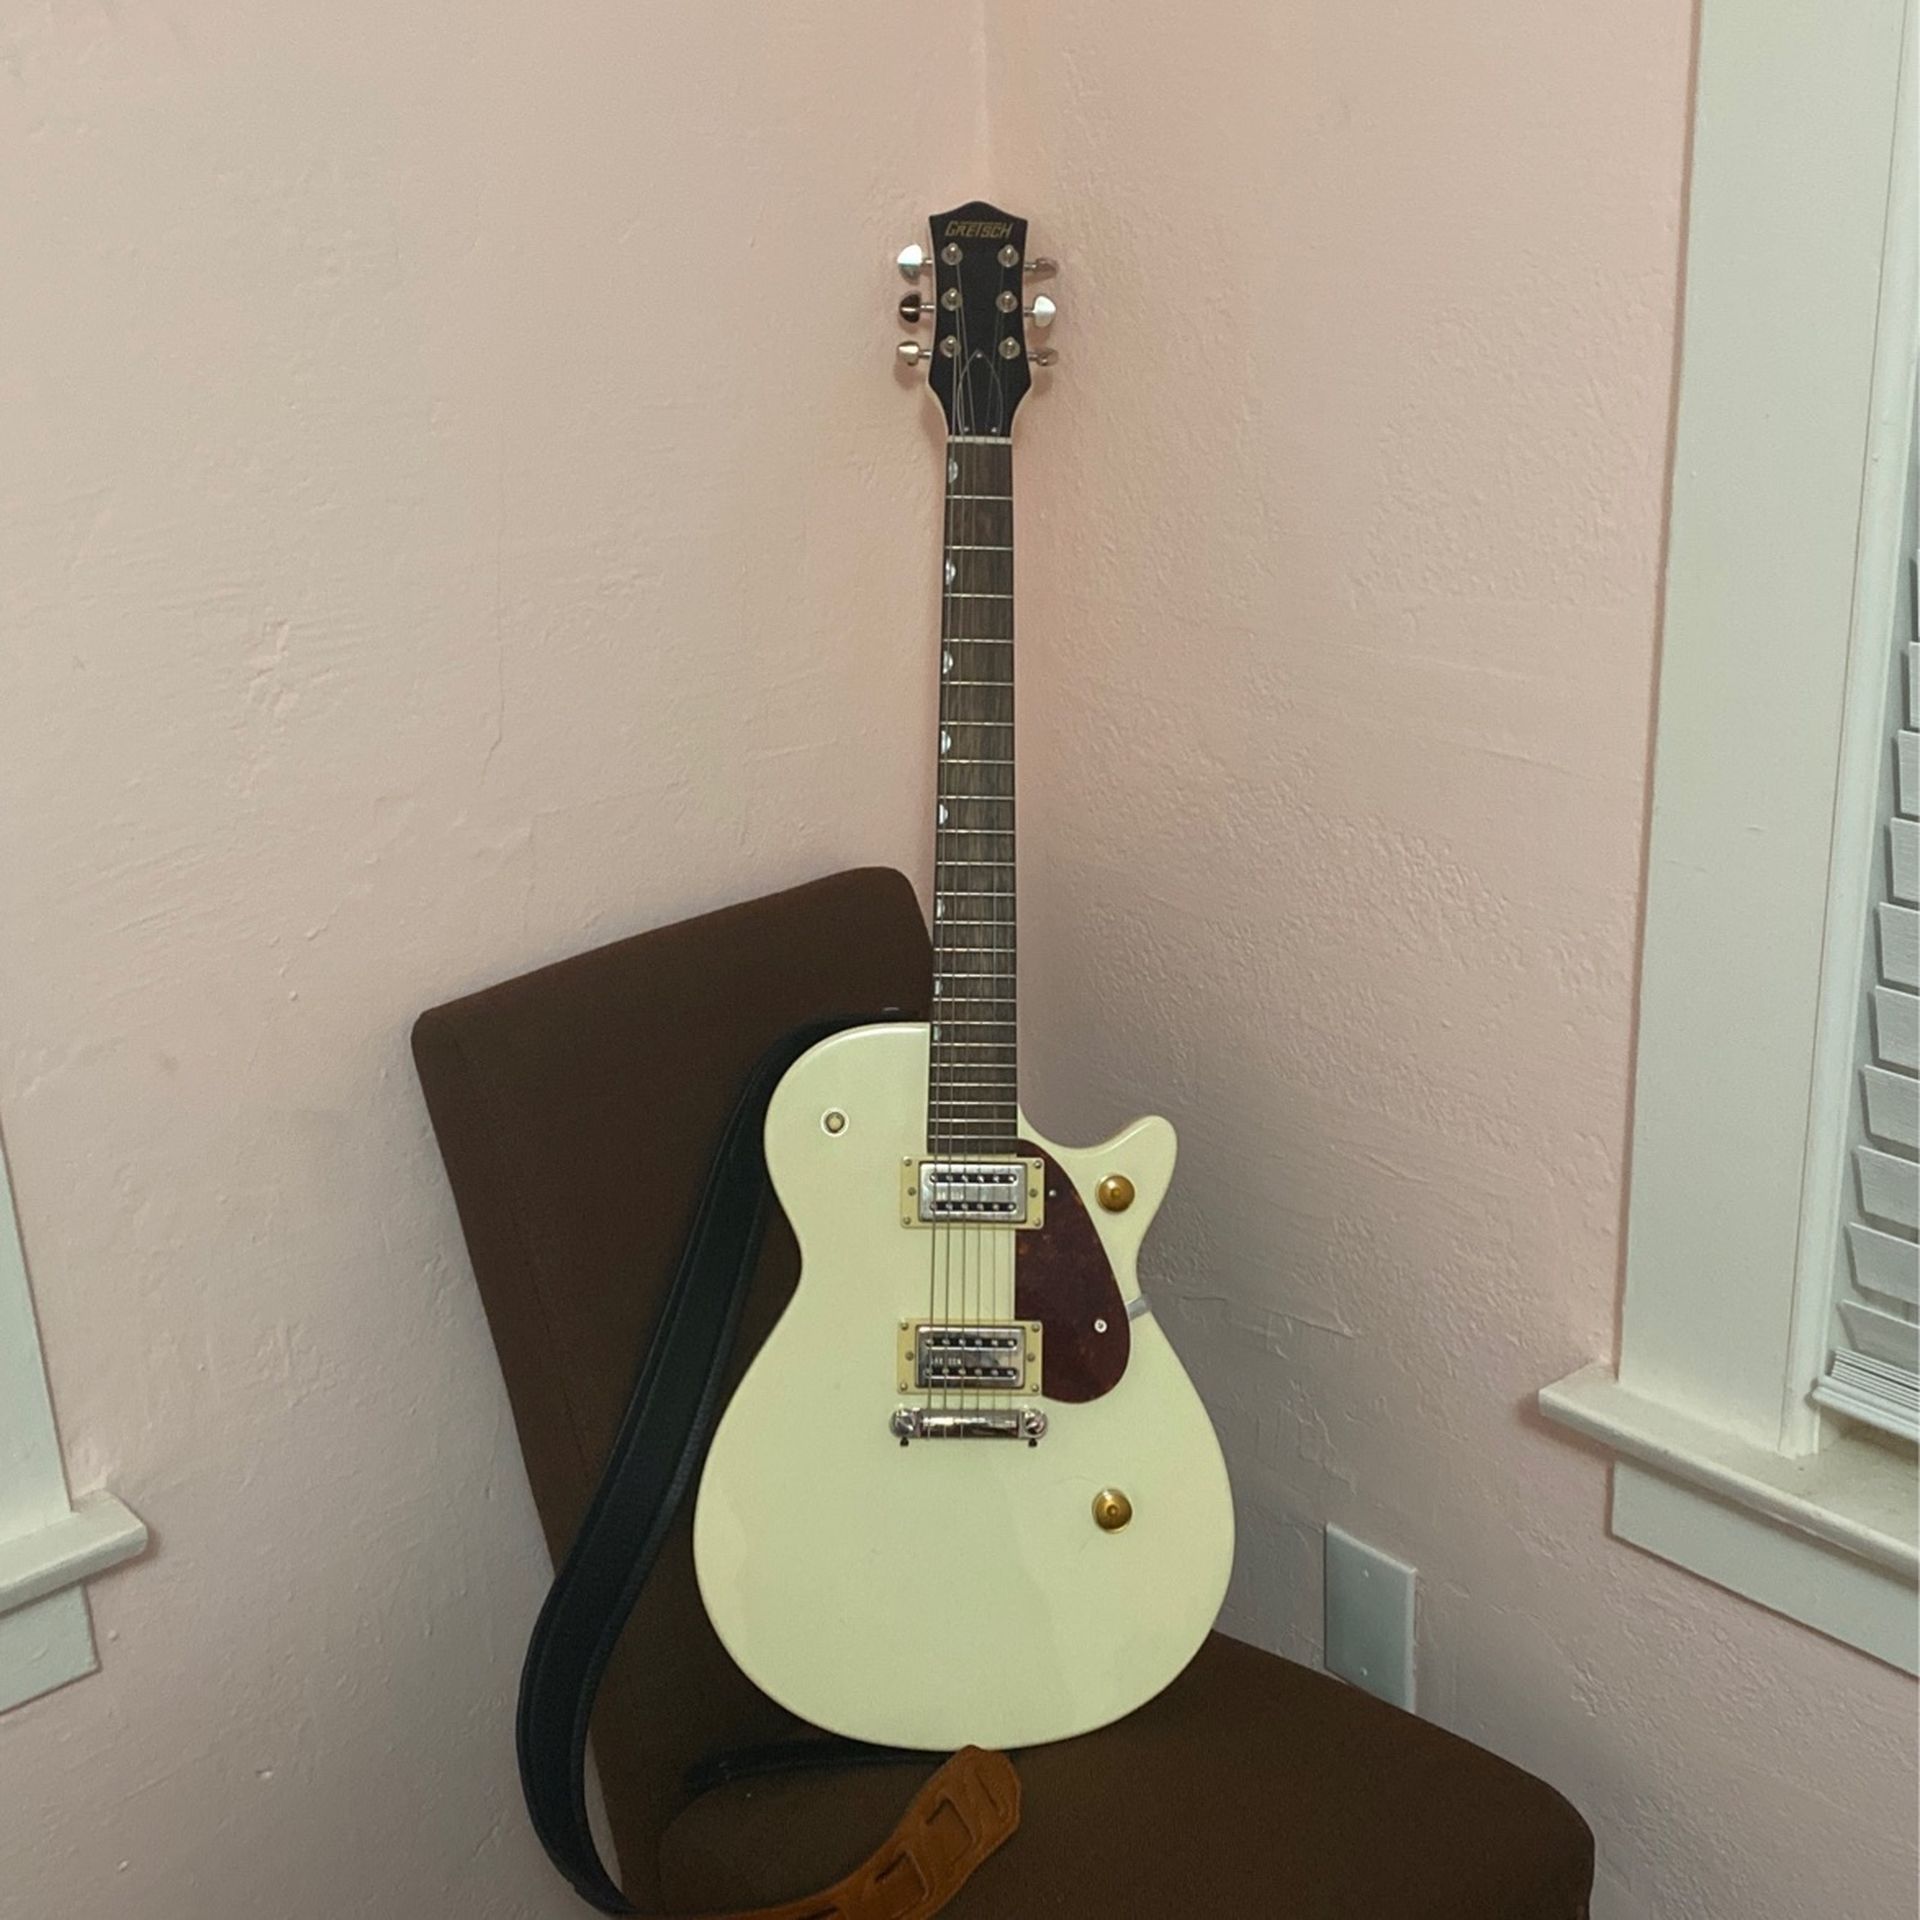 Gretsch Guitar With Orange Amp Included.